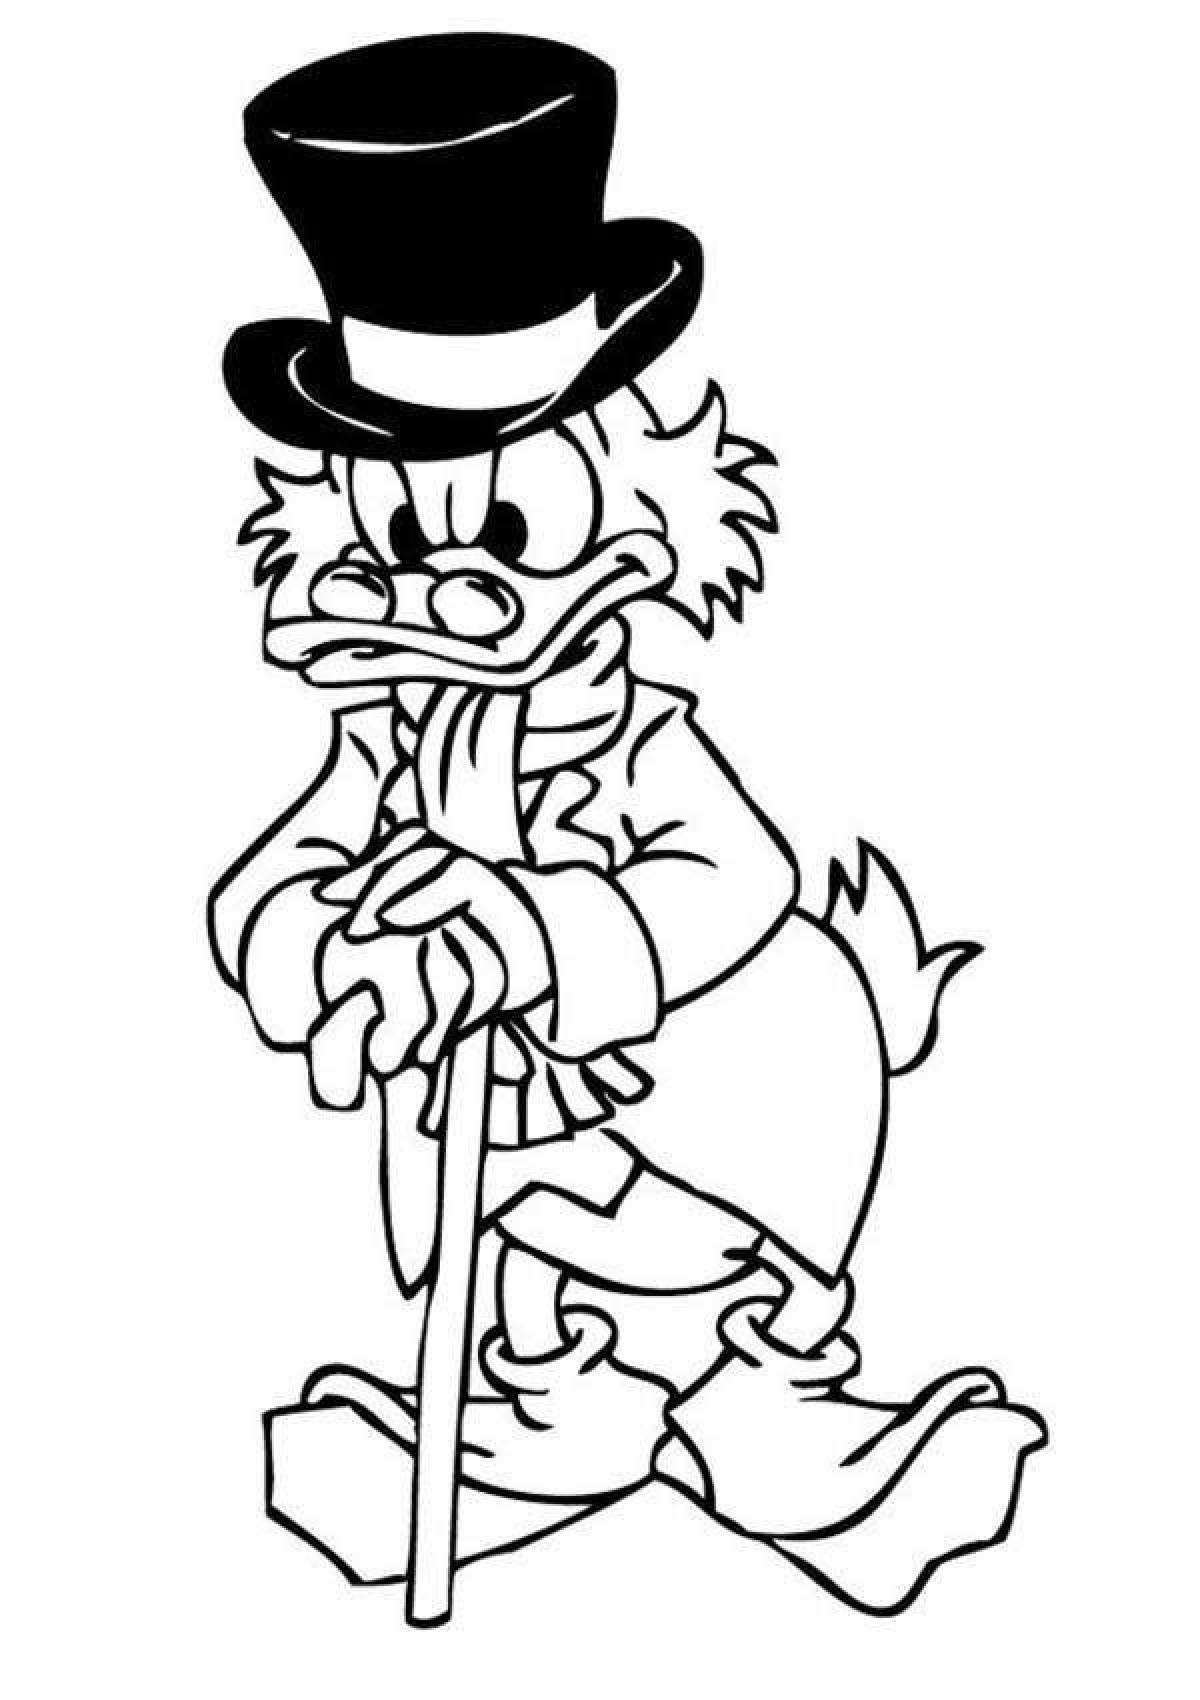 Coloring book playful scrooge